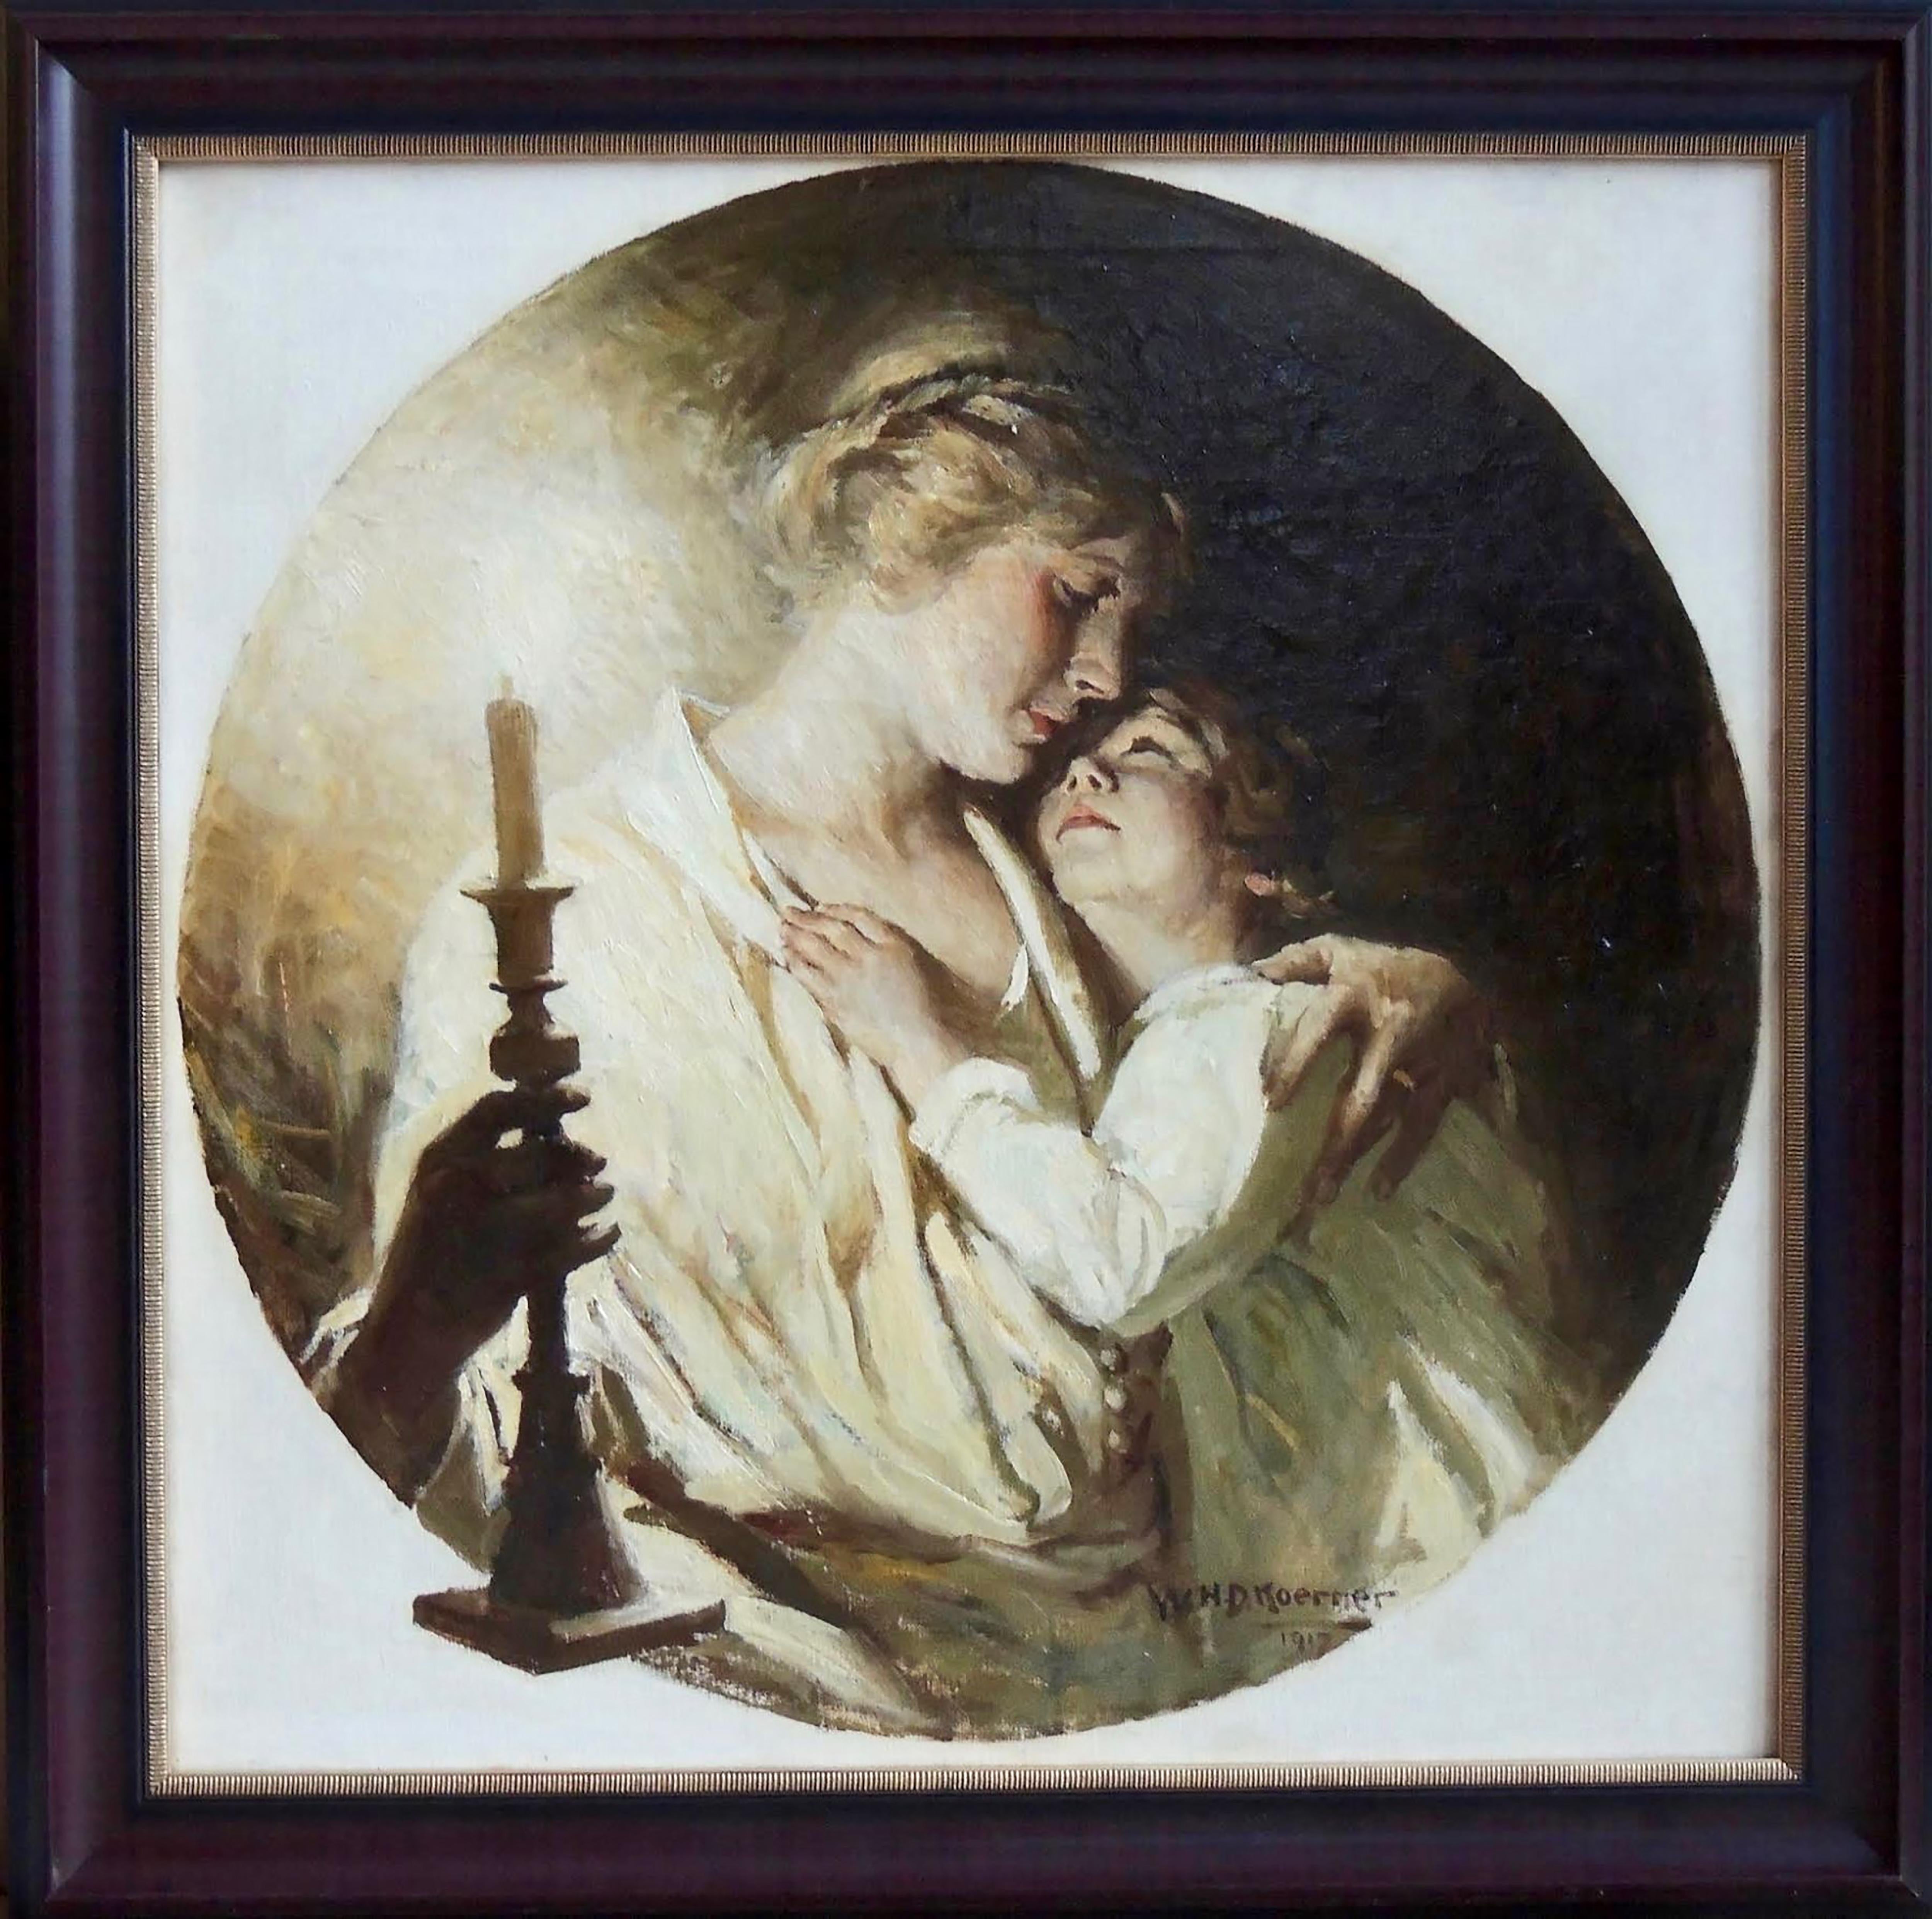 Mother with Child by Candlelight - Painting by William Henry Dethlef Koerner